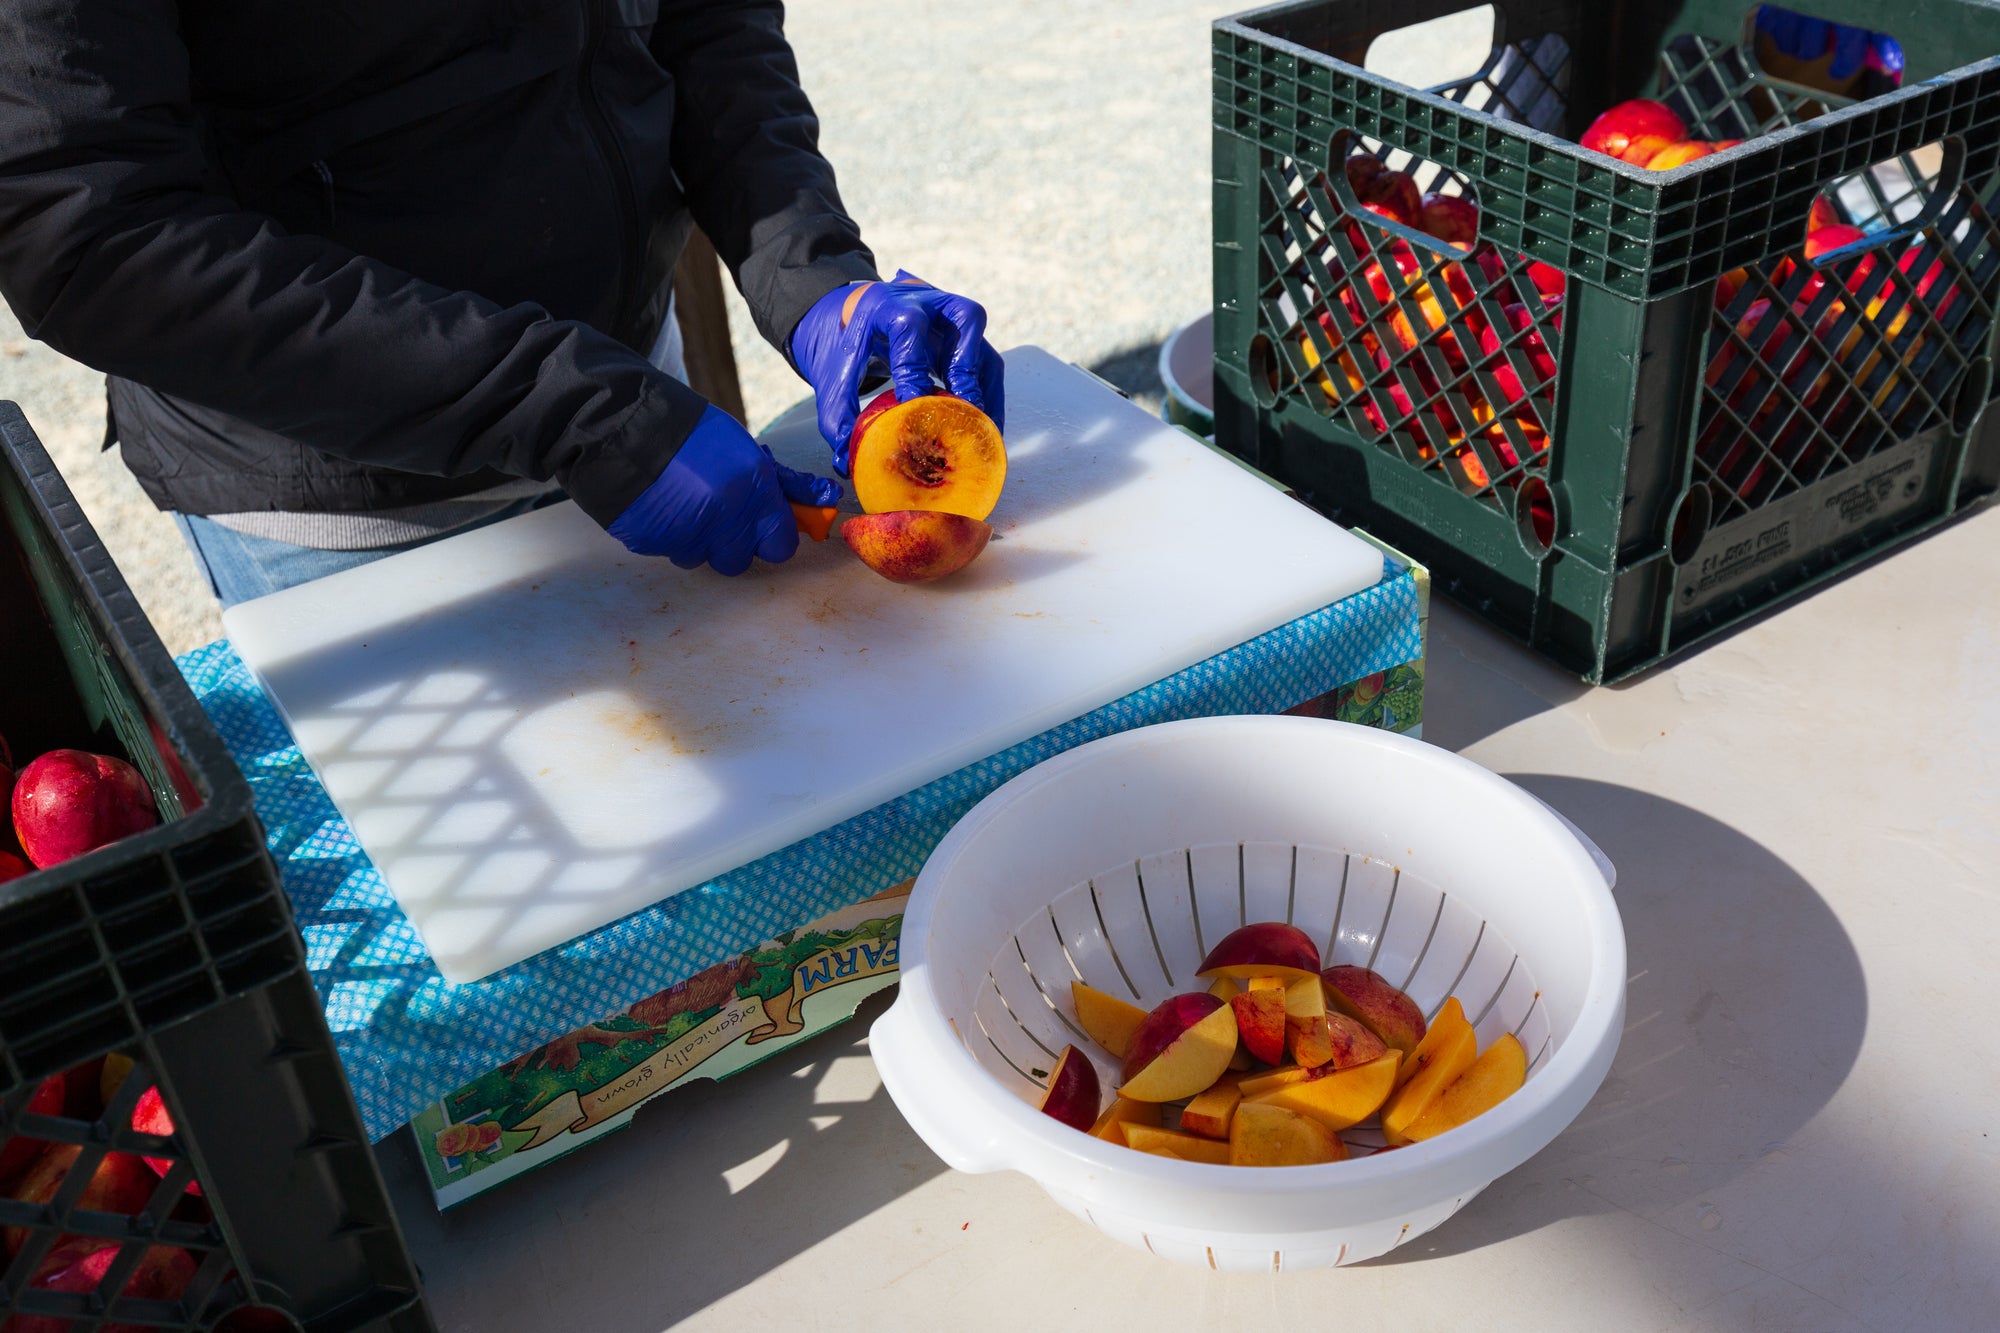 Cutting fresh nectarines by hand to place on drying racks